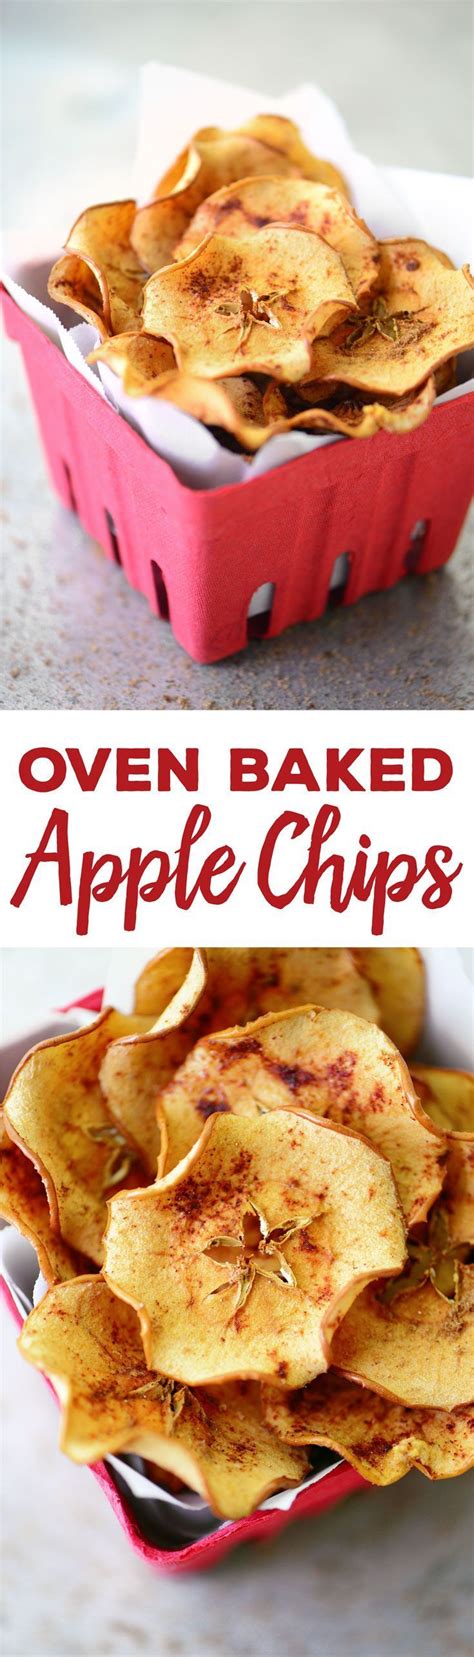 Baked Apple Chips Are Simple To Make With Only Four Ingredients These